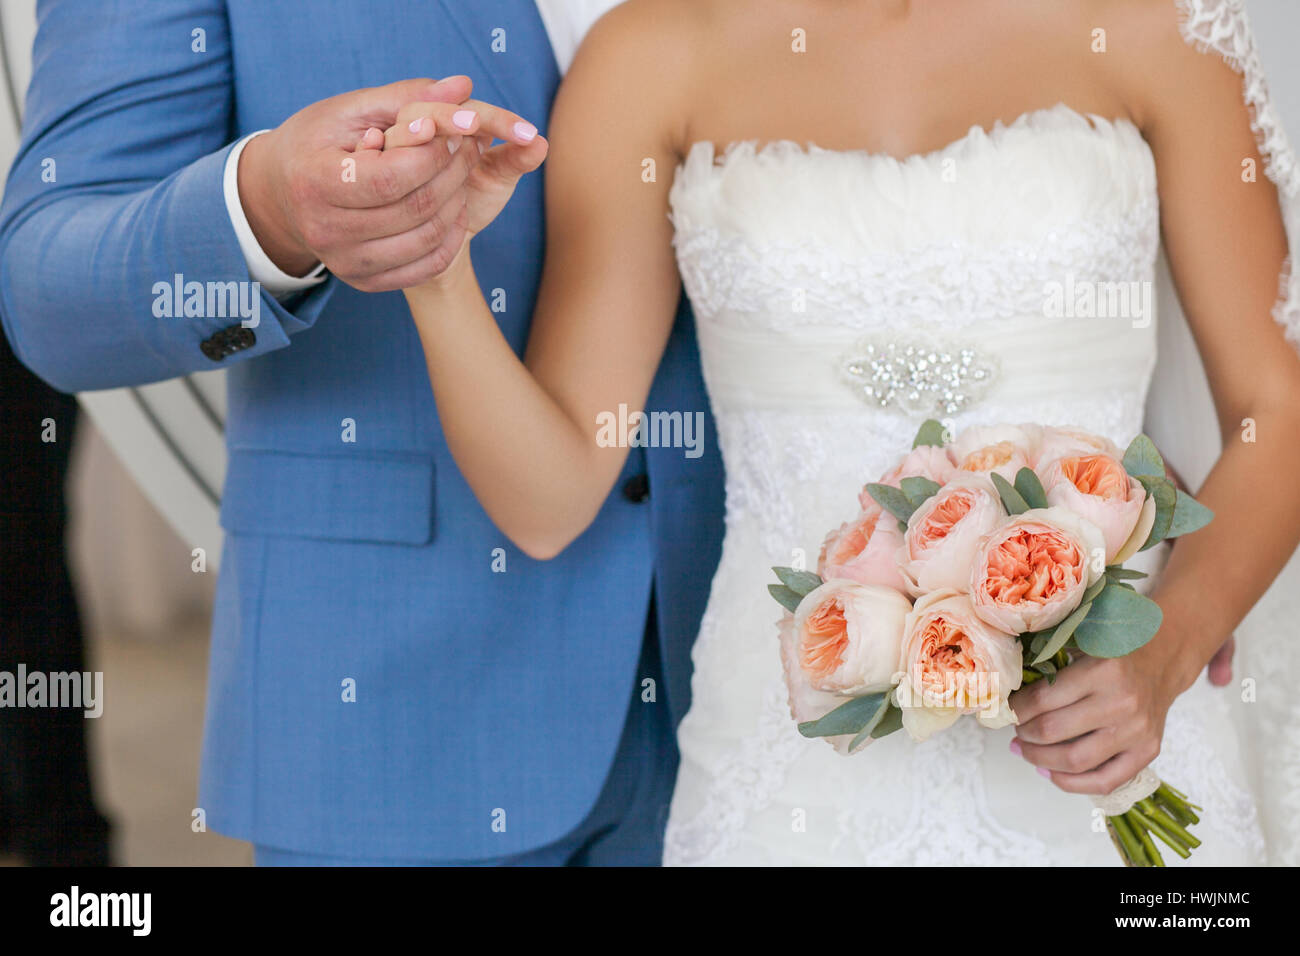 Young wedding couple. Groom and bride together. Stock Photo